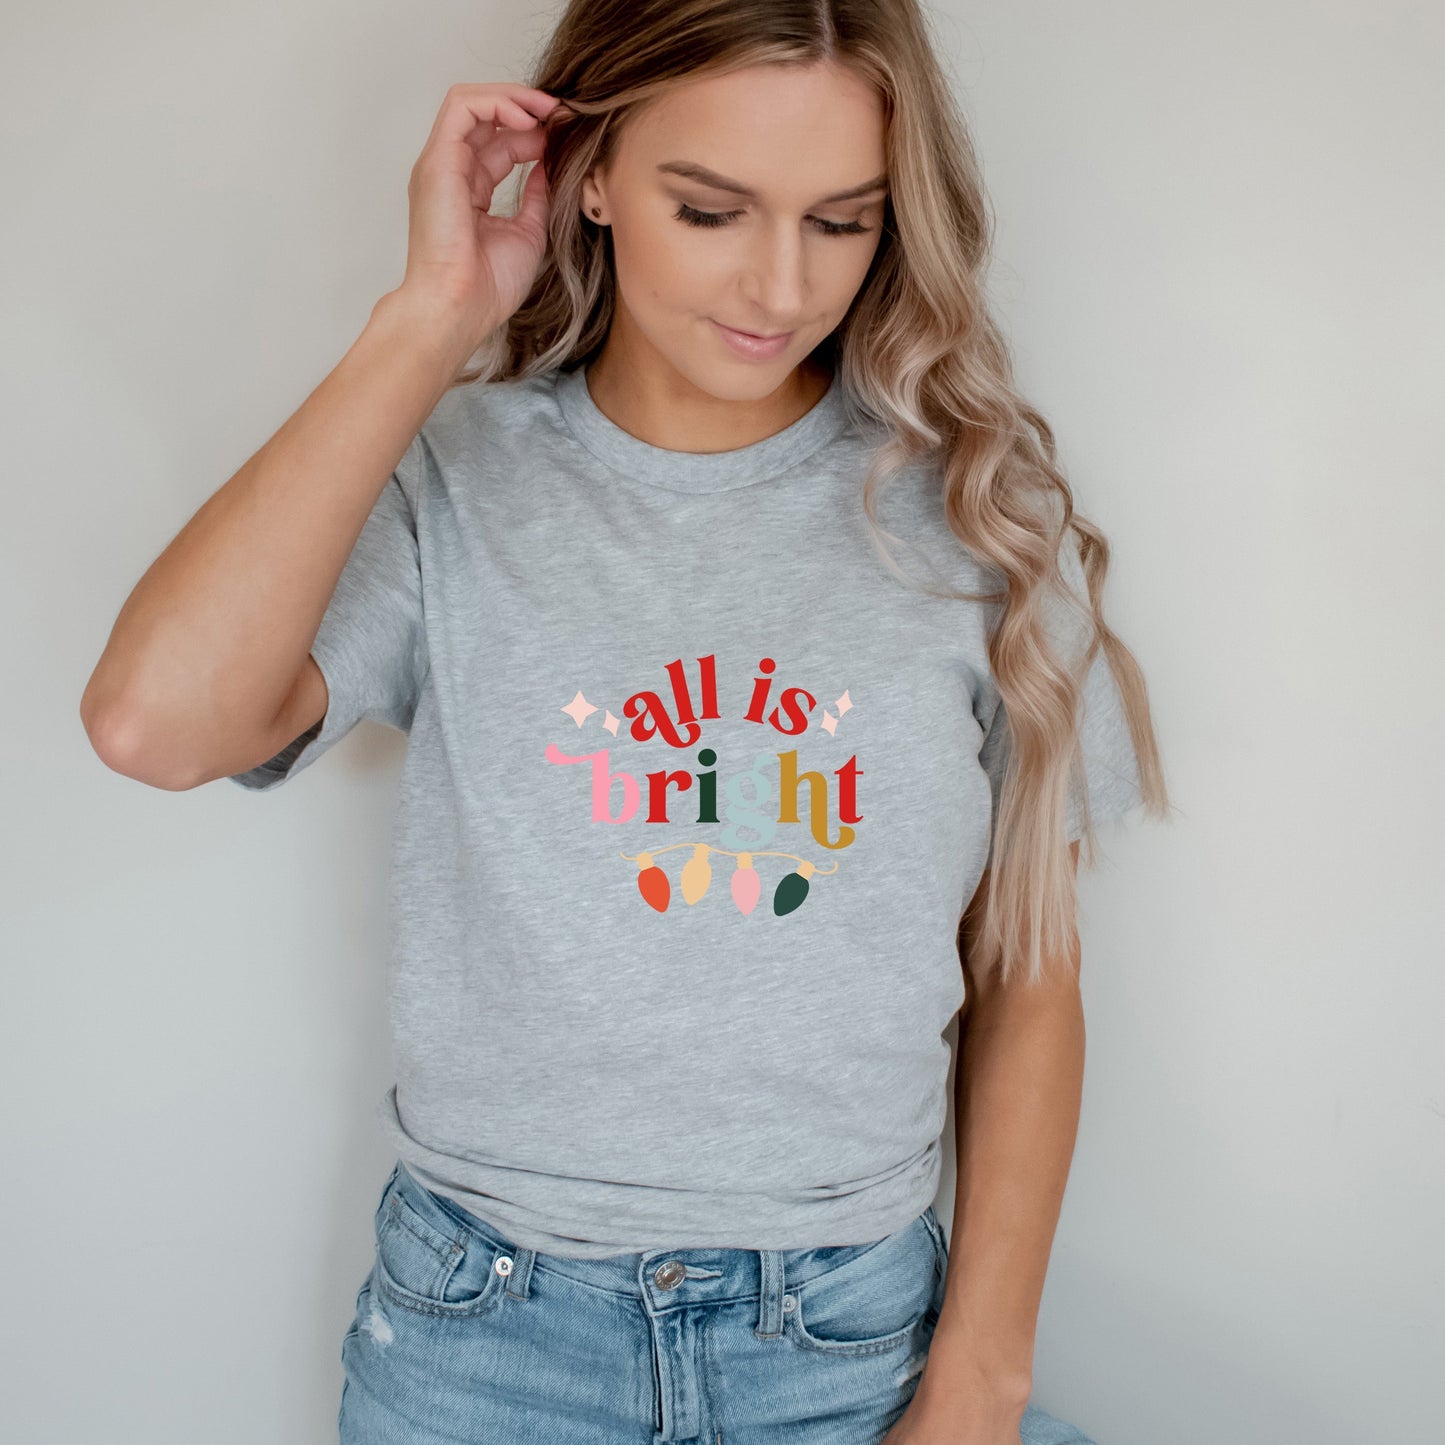 All Is Bright Christmas Lights | Short Sleeve Crew Neck